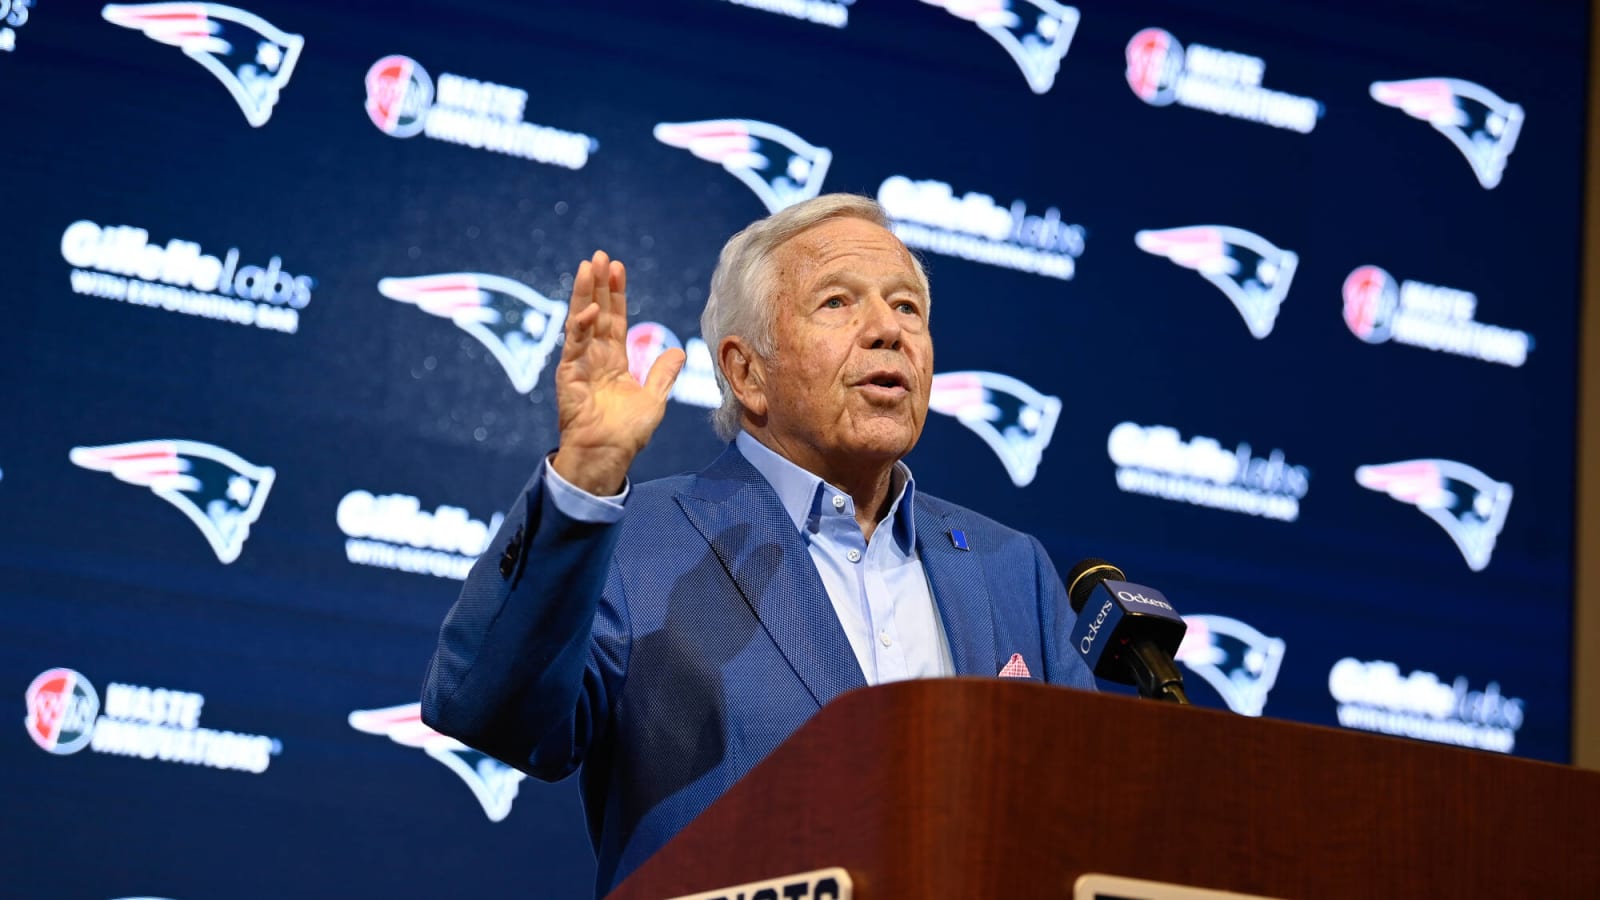 Patriots owner Robert Kraft explains why team parted ways with Bill Belichick